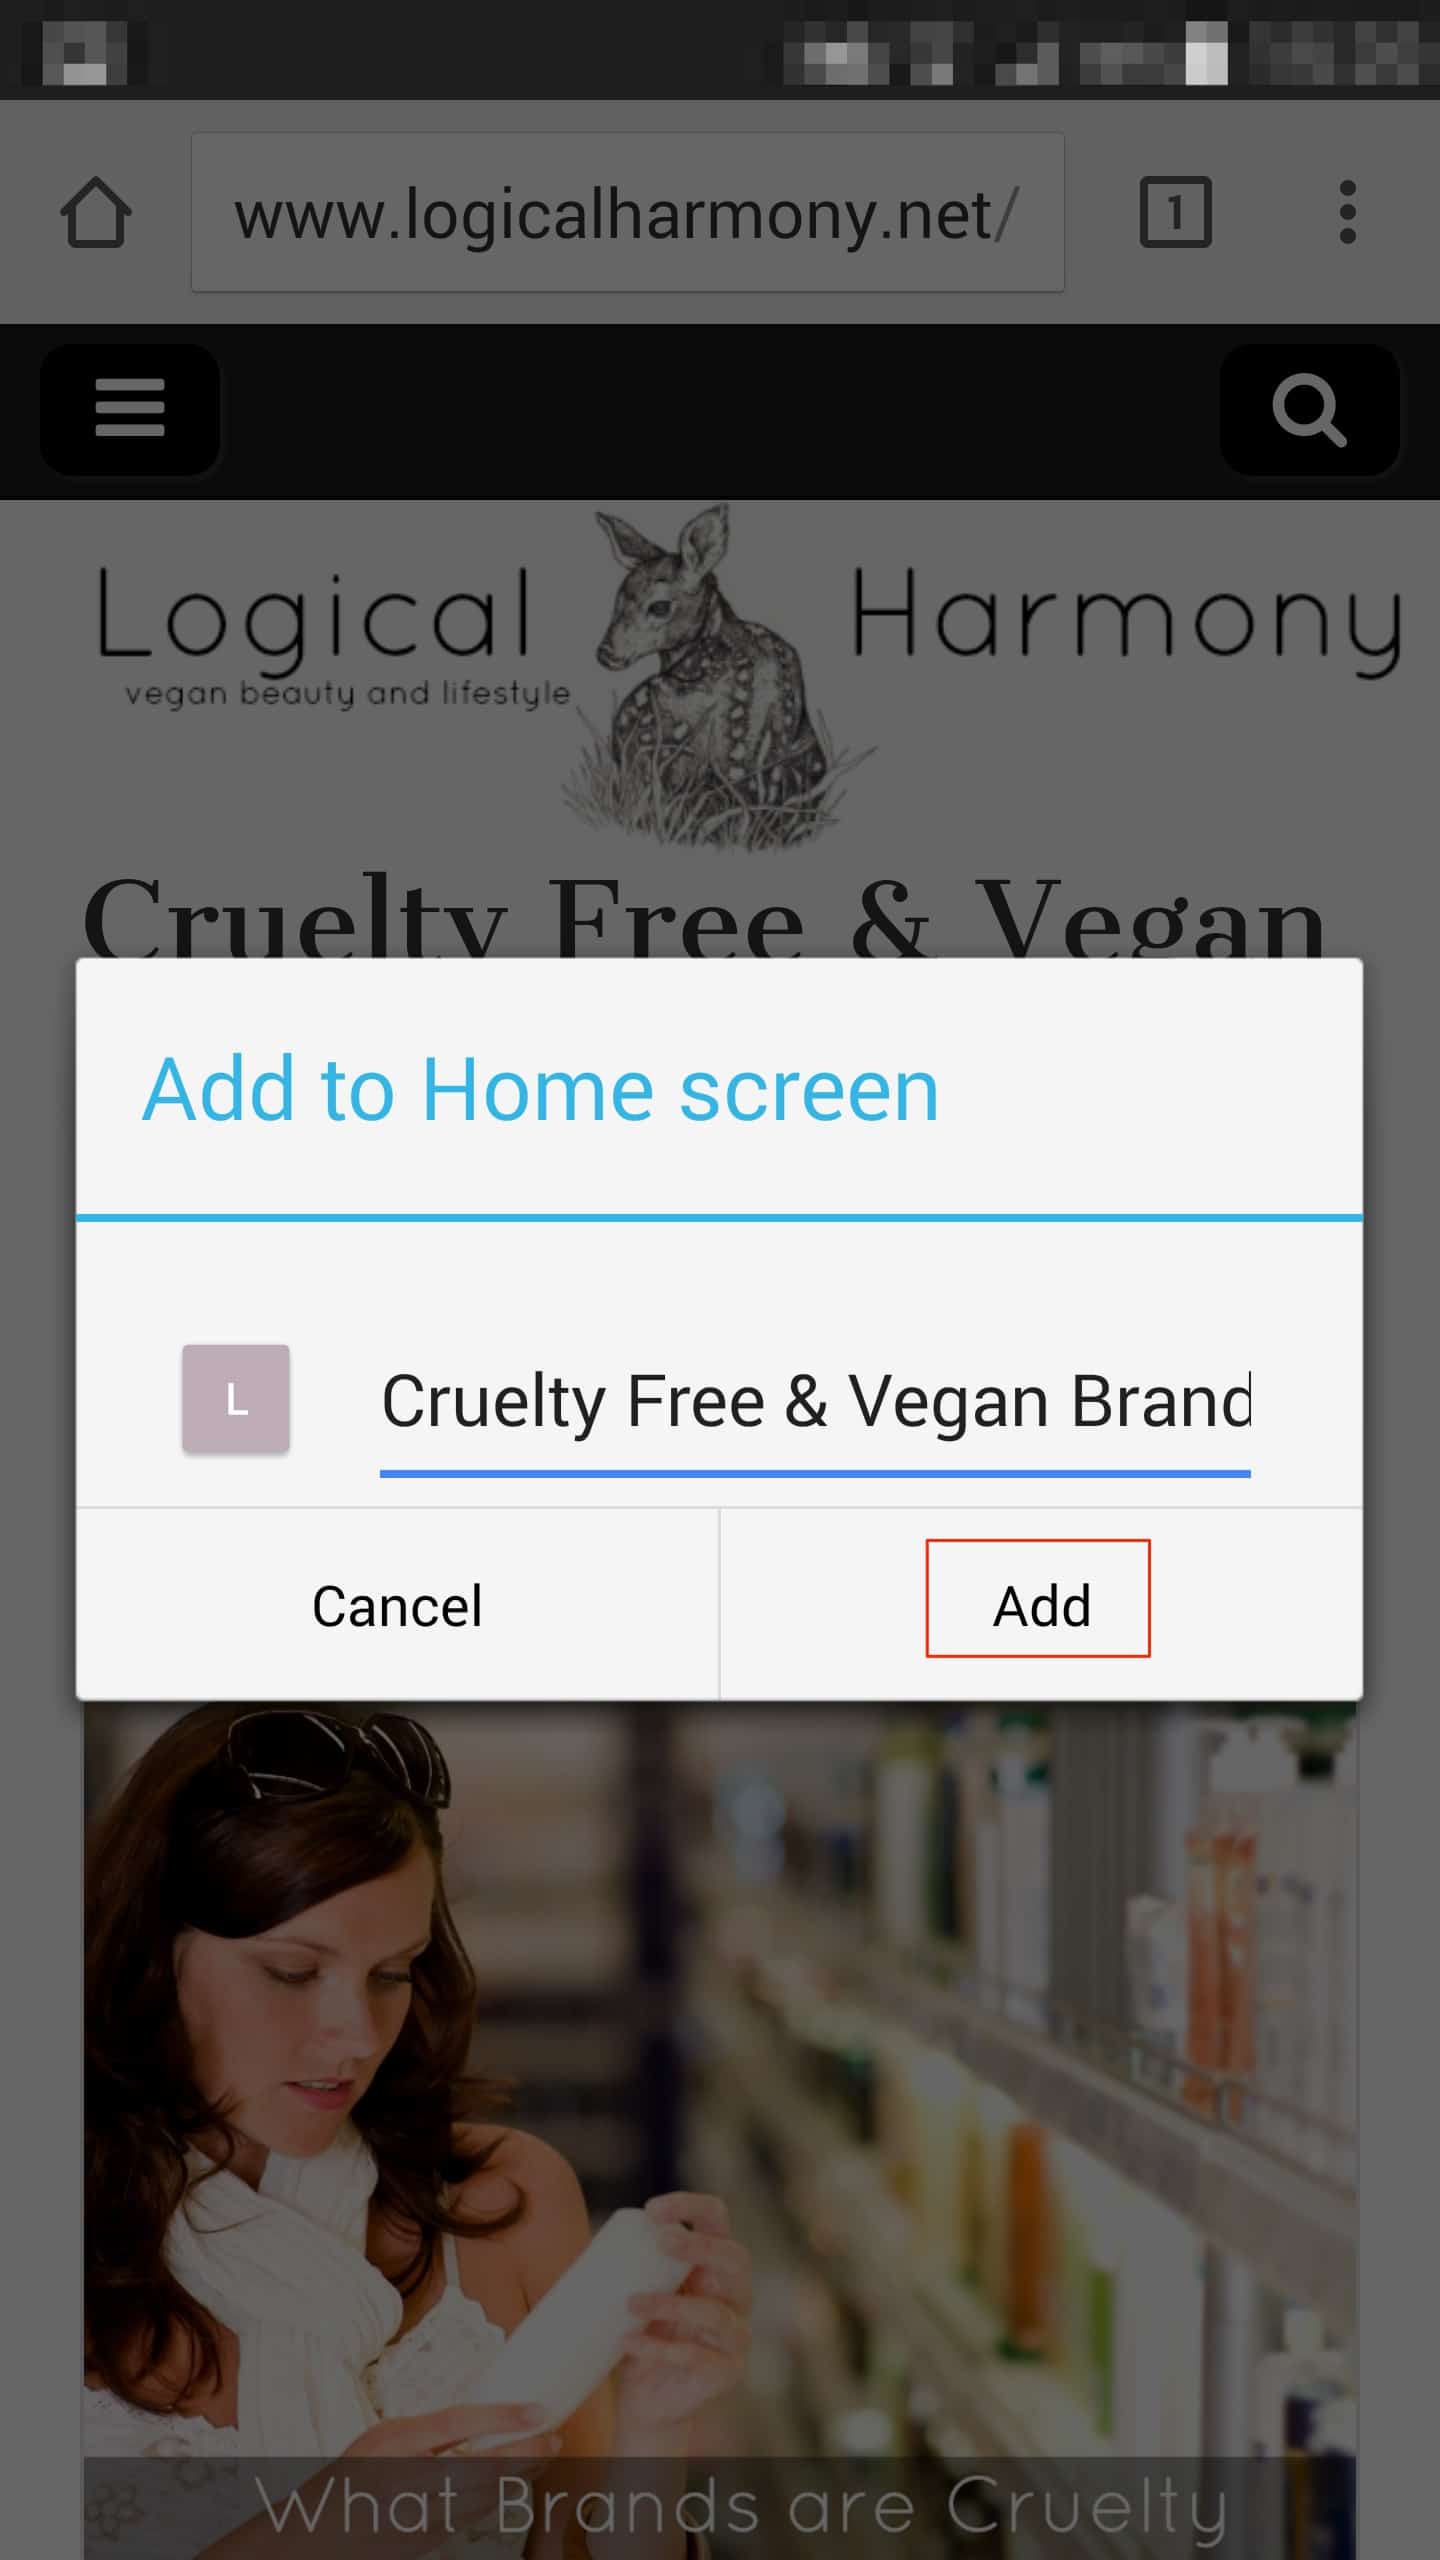 How to Add the Logical Harmony Cruelty Free Brand List to your Droid